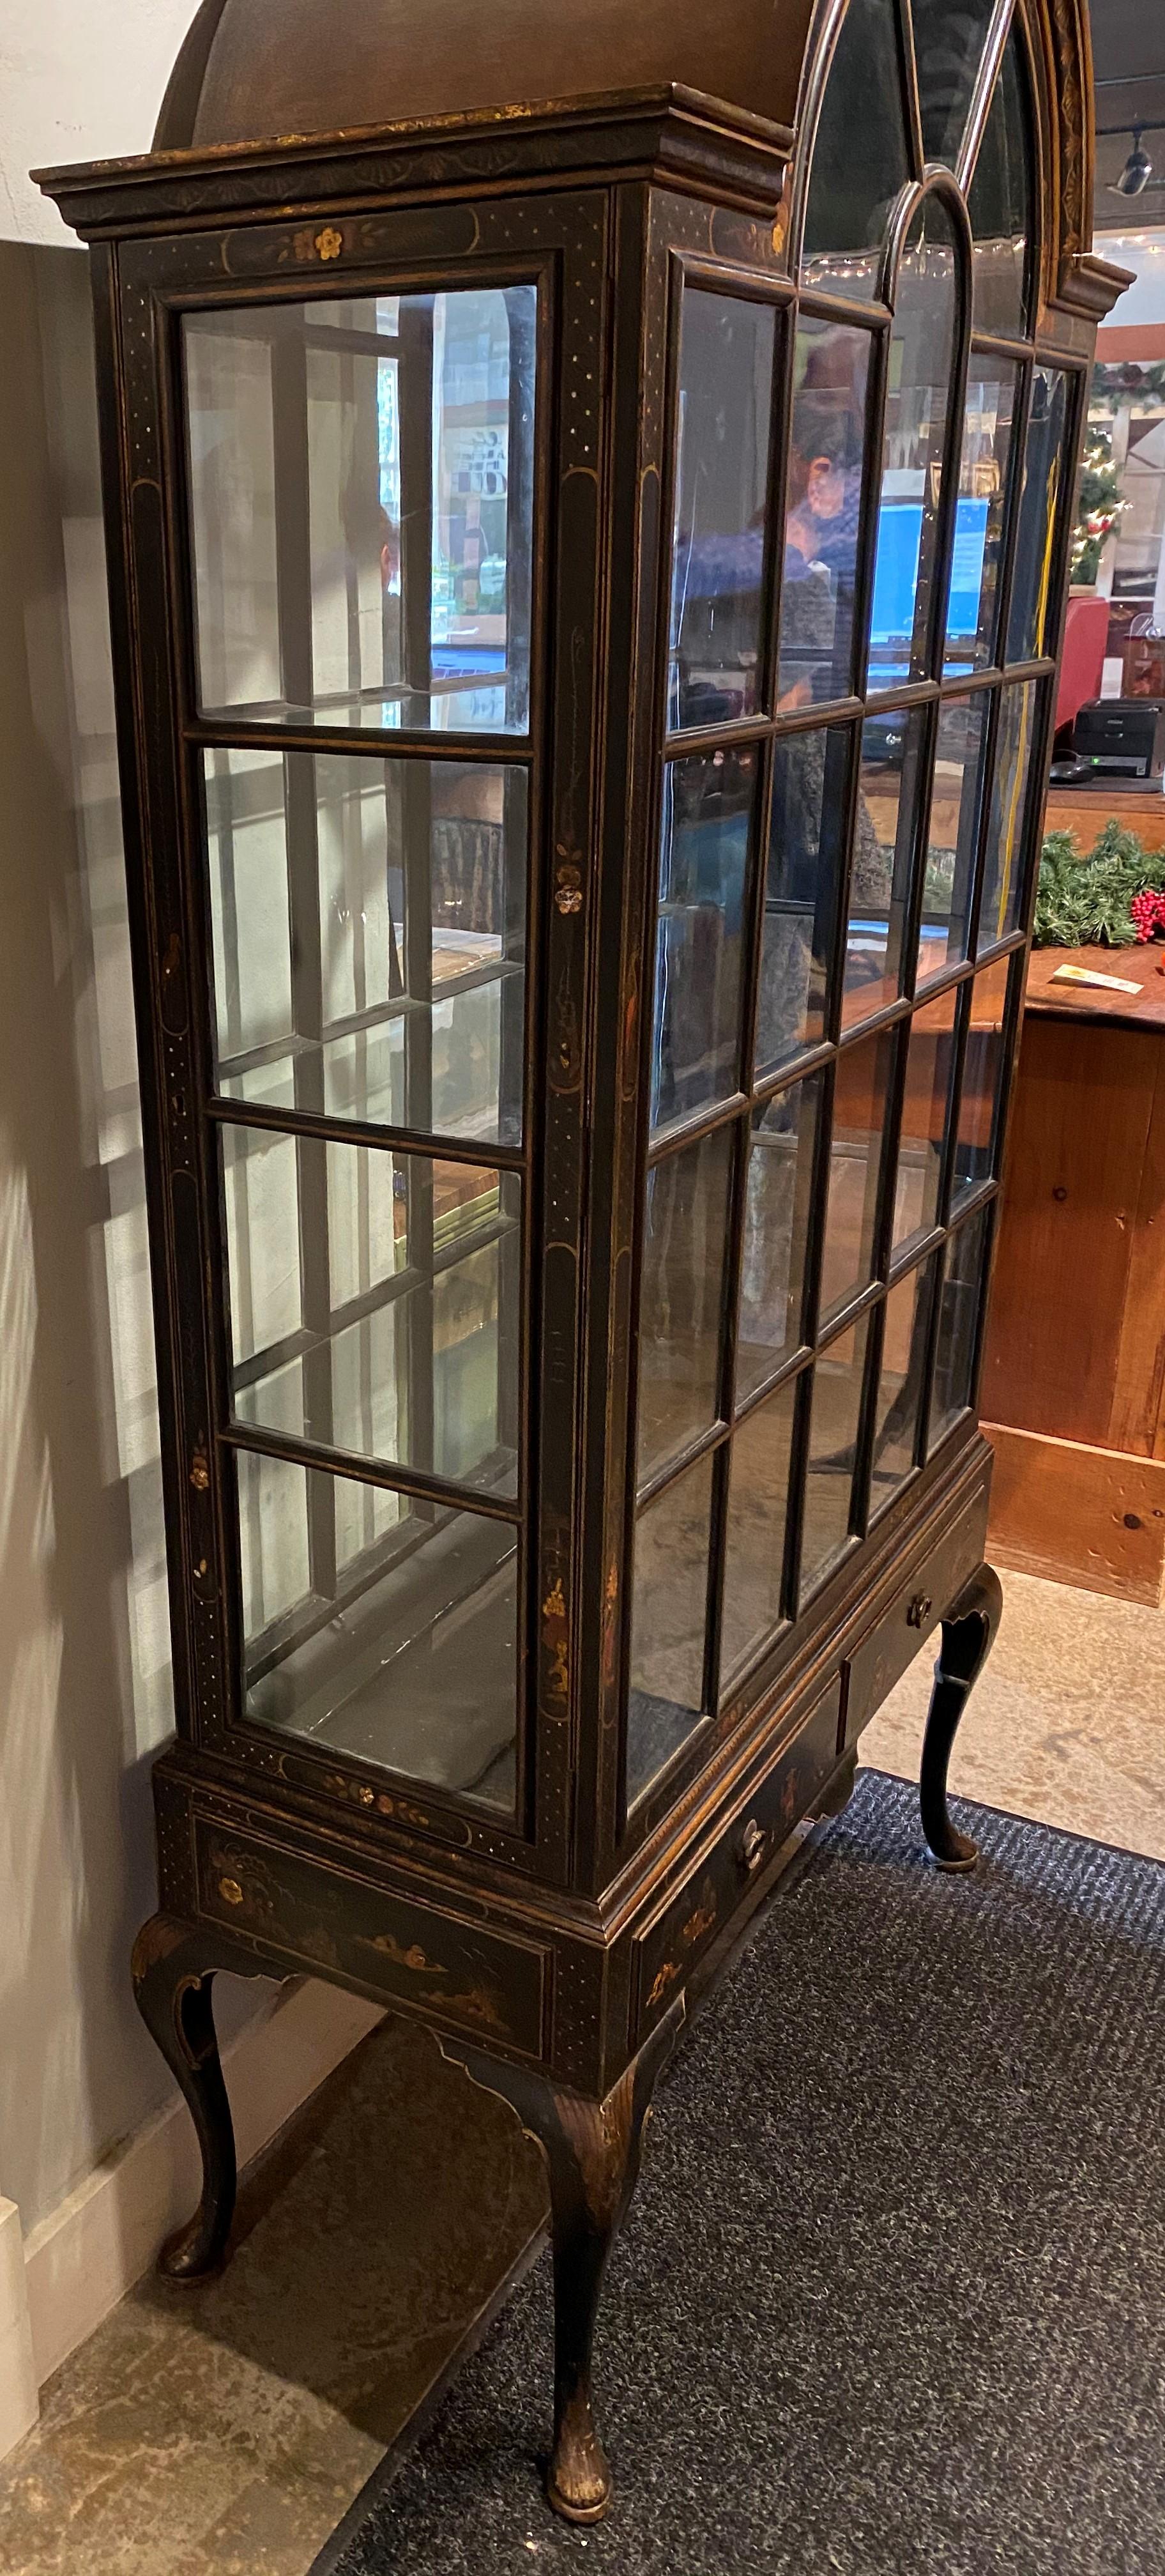 A fine Maison Jansen arched double sided vitrine cabinet with wooden frame, hinged glass paneled doors on either side, glazed glass panels on front and back, three interior glass shelves, polychrome chinoiserie decoration on an ebonized background,